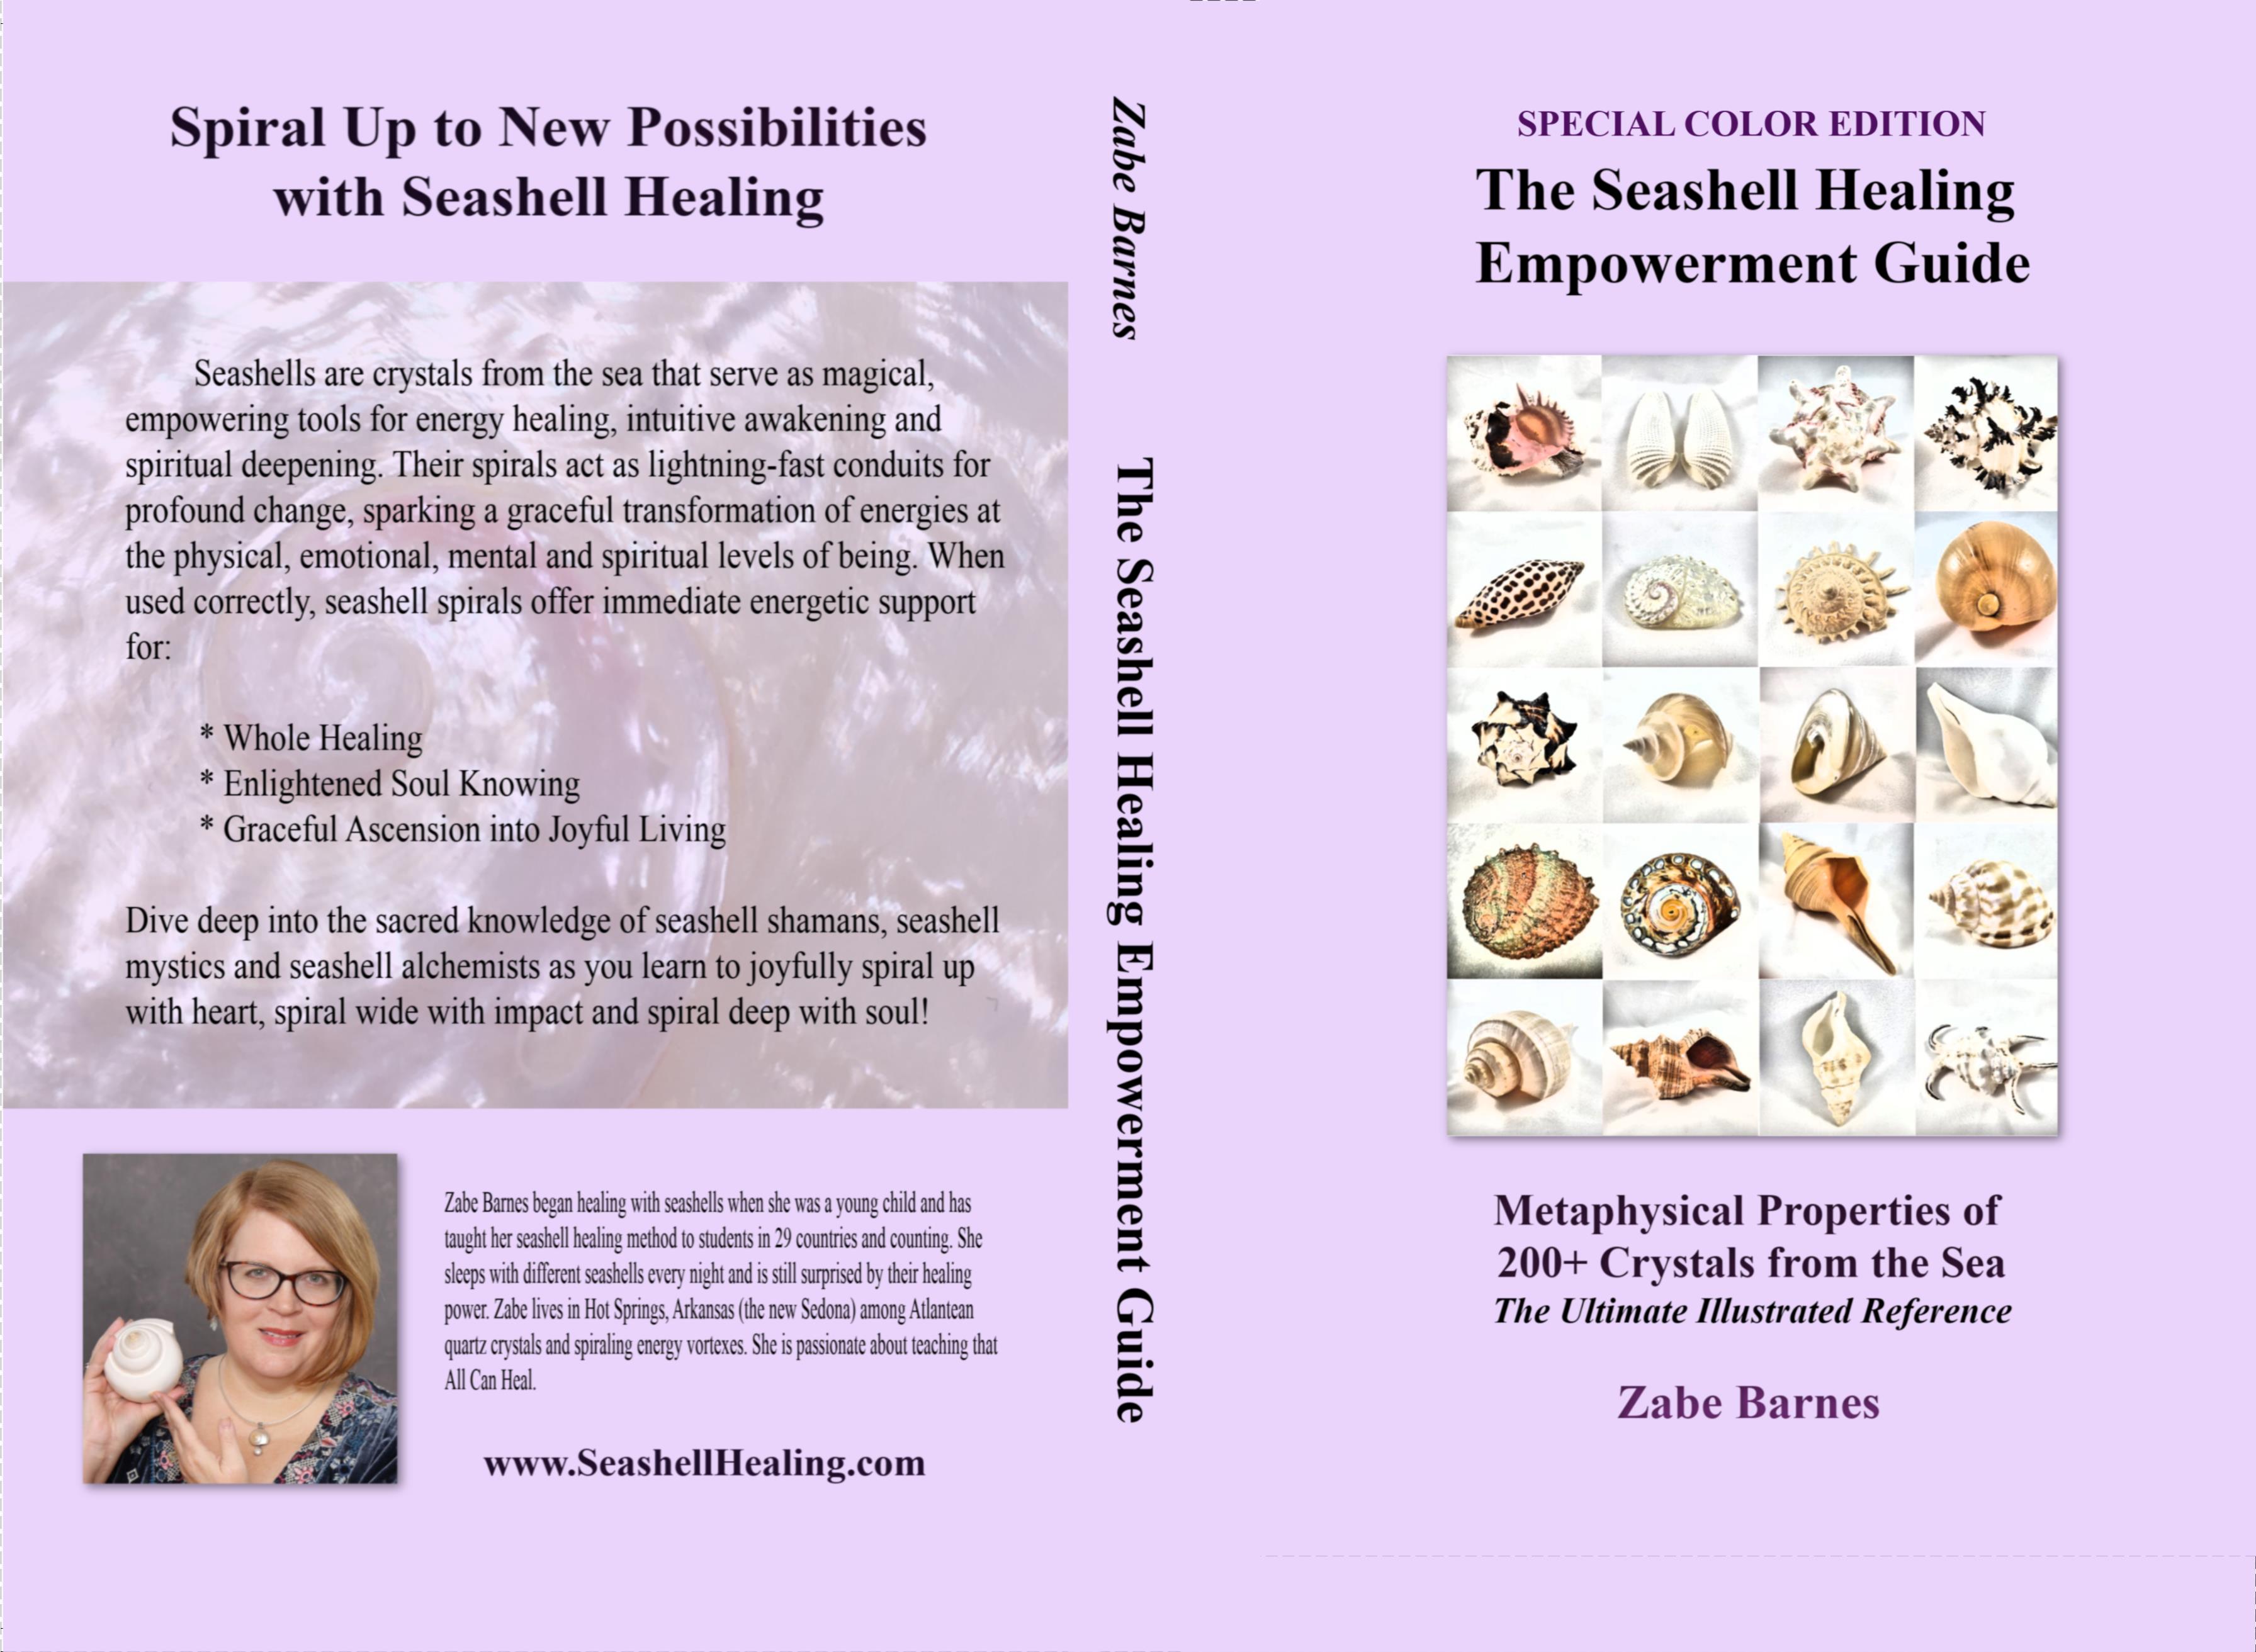 The Seashell Healing Empowerment Guide: Color Edition cover image